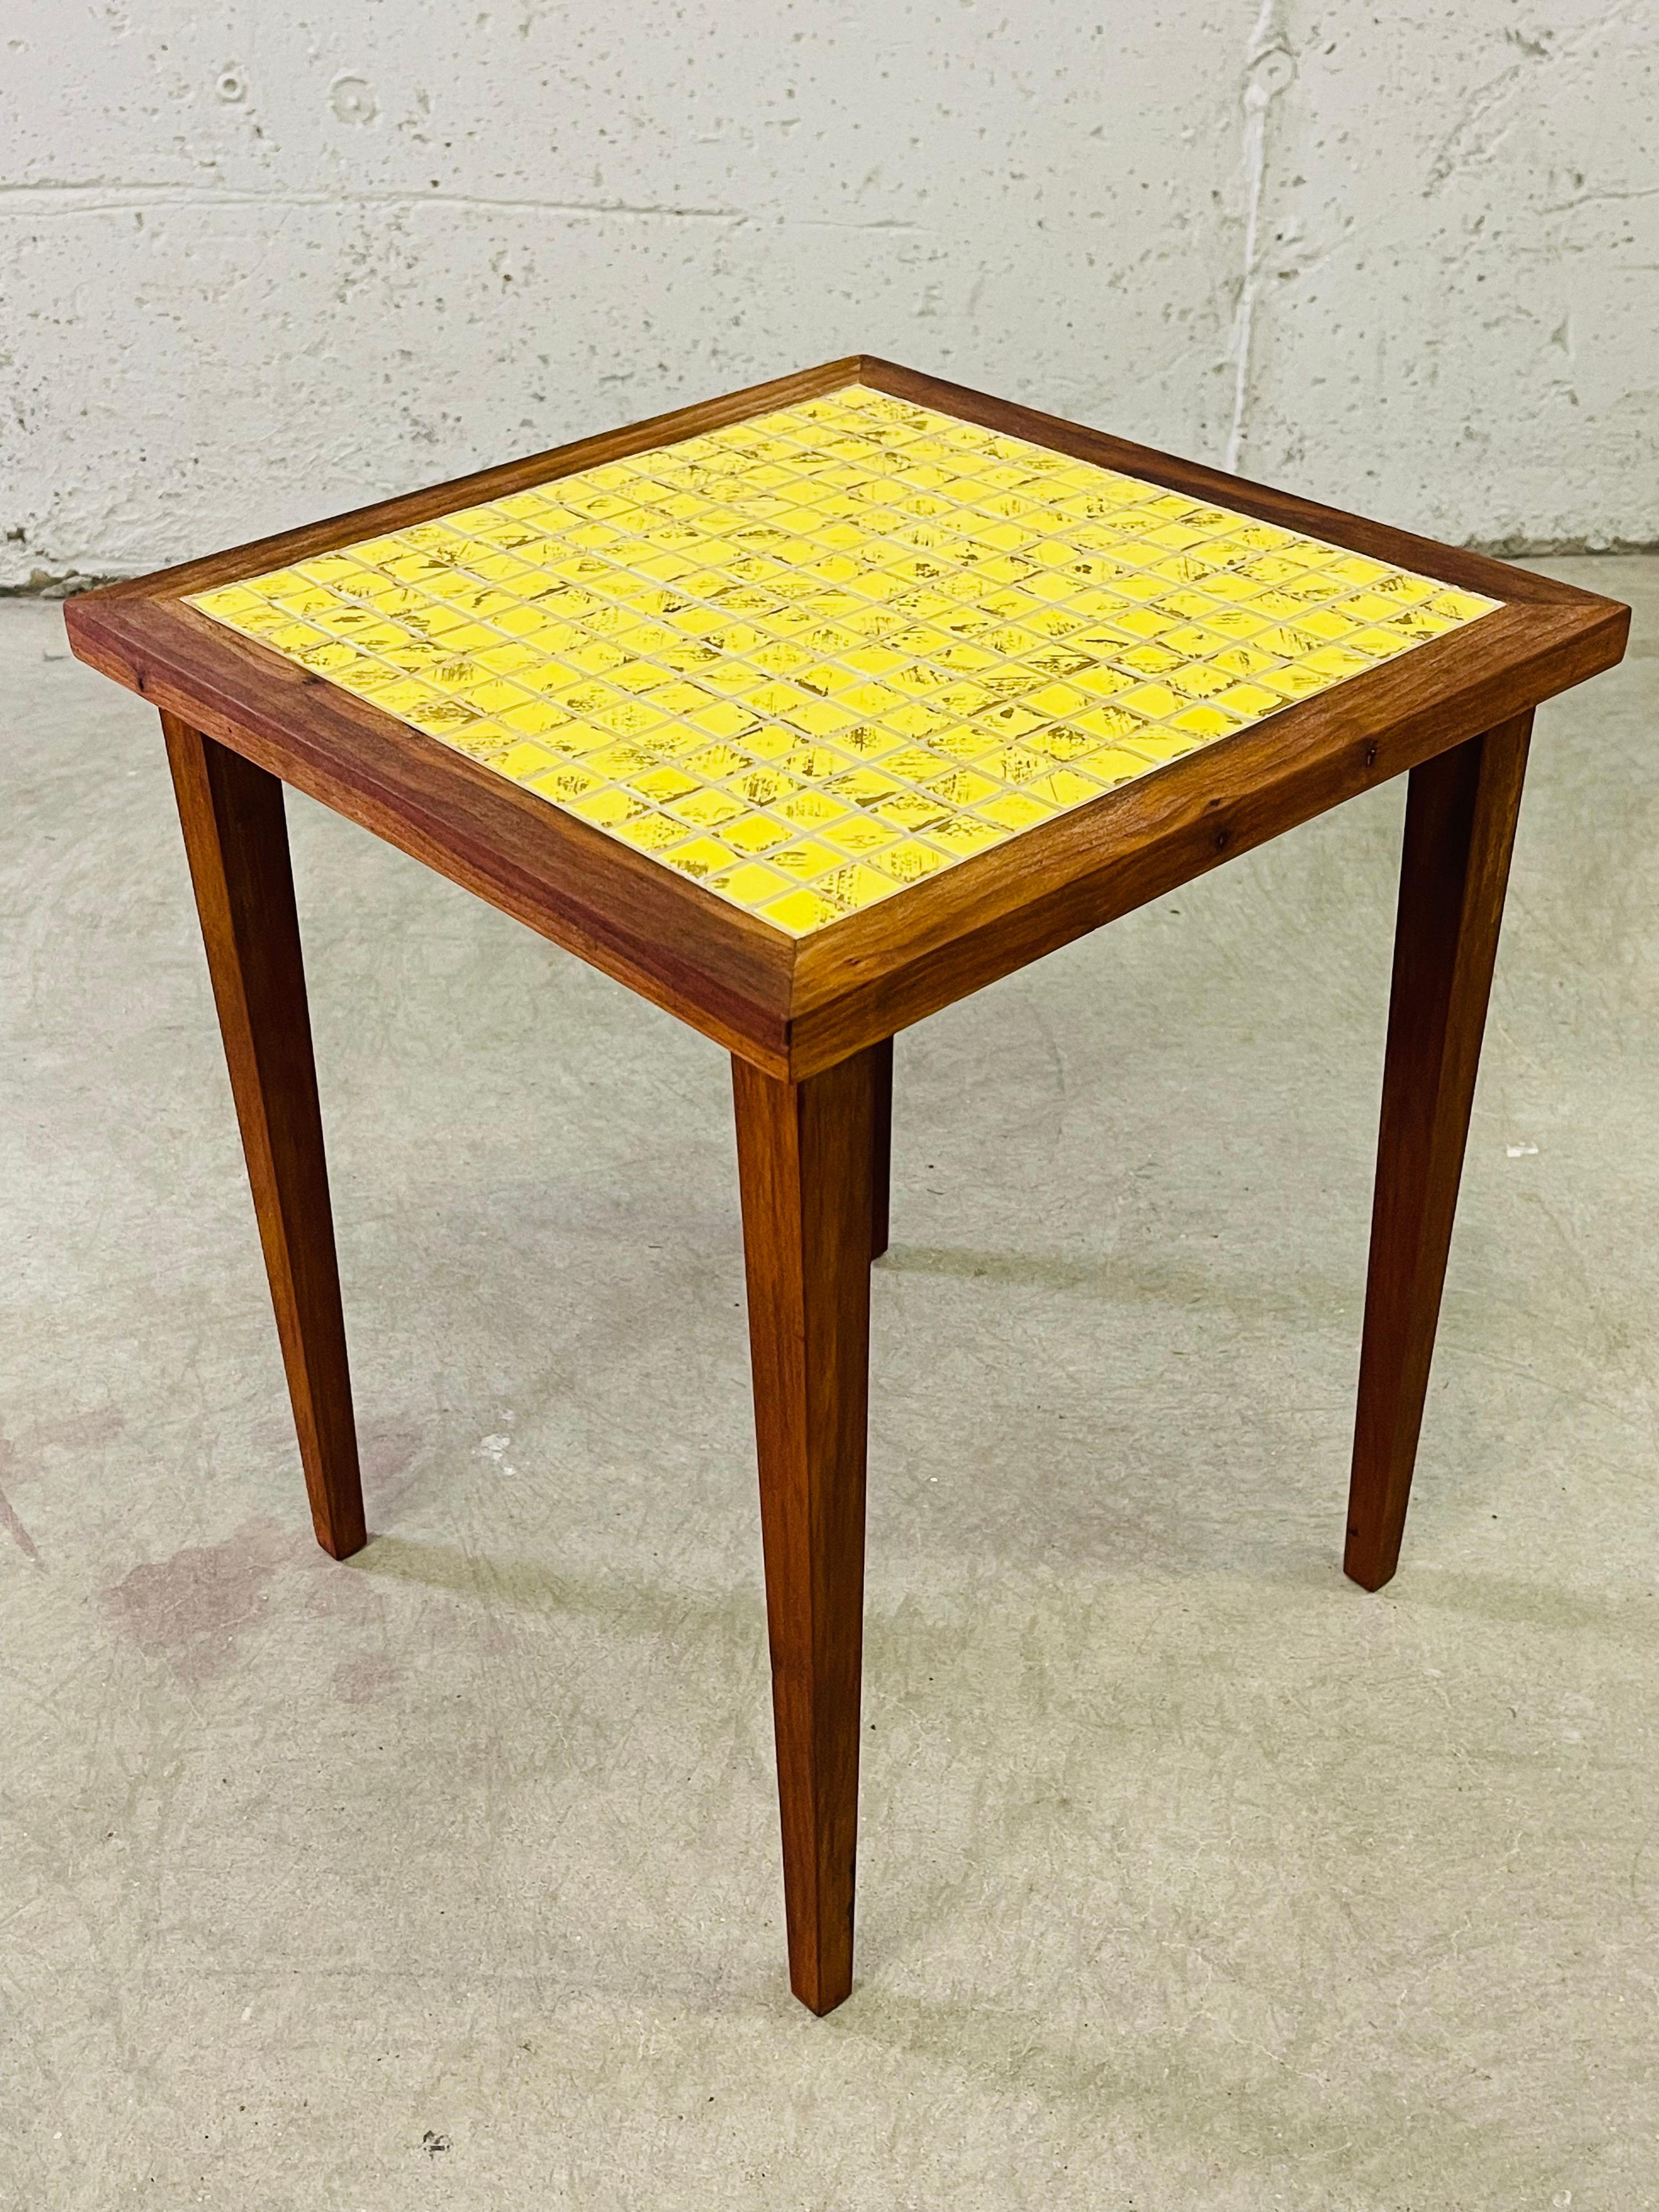 1960s Square Tile Top Side Table In Good Condition For Sale In Amherst, NH